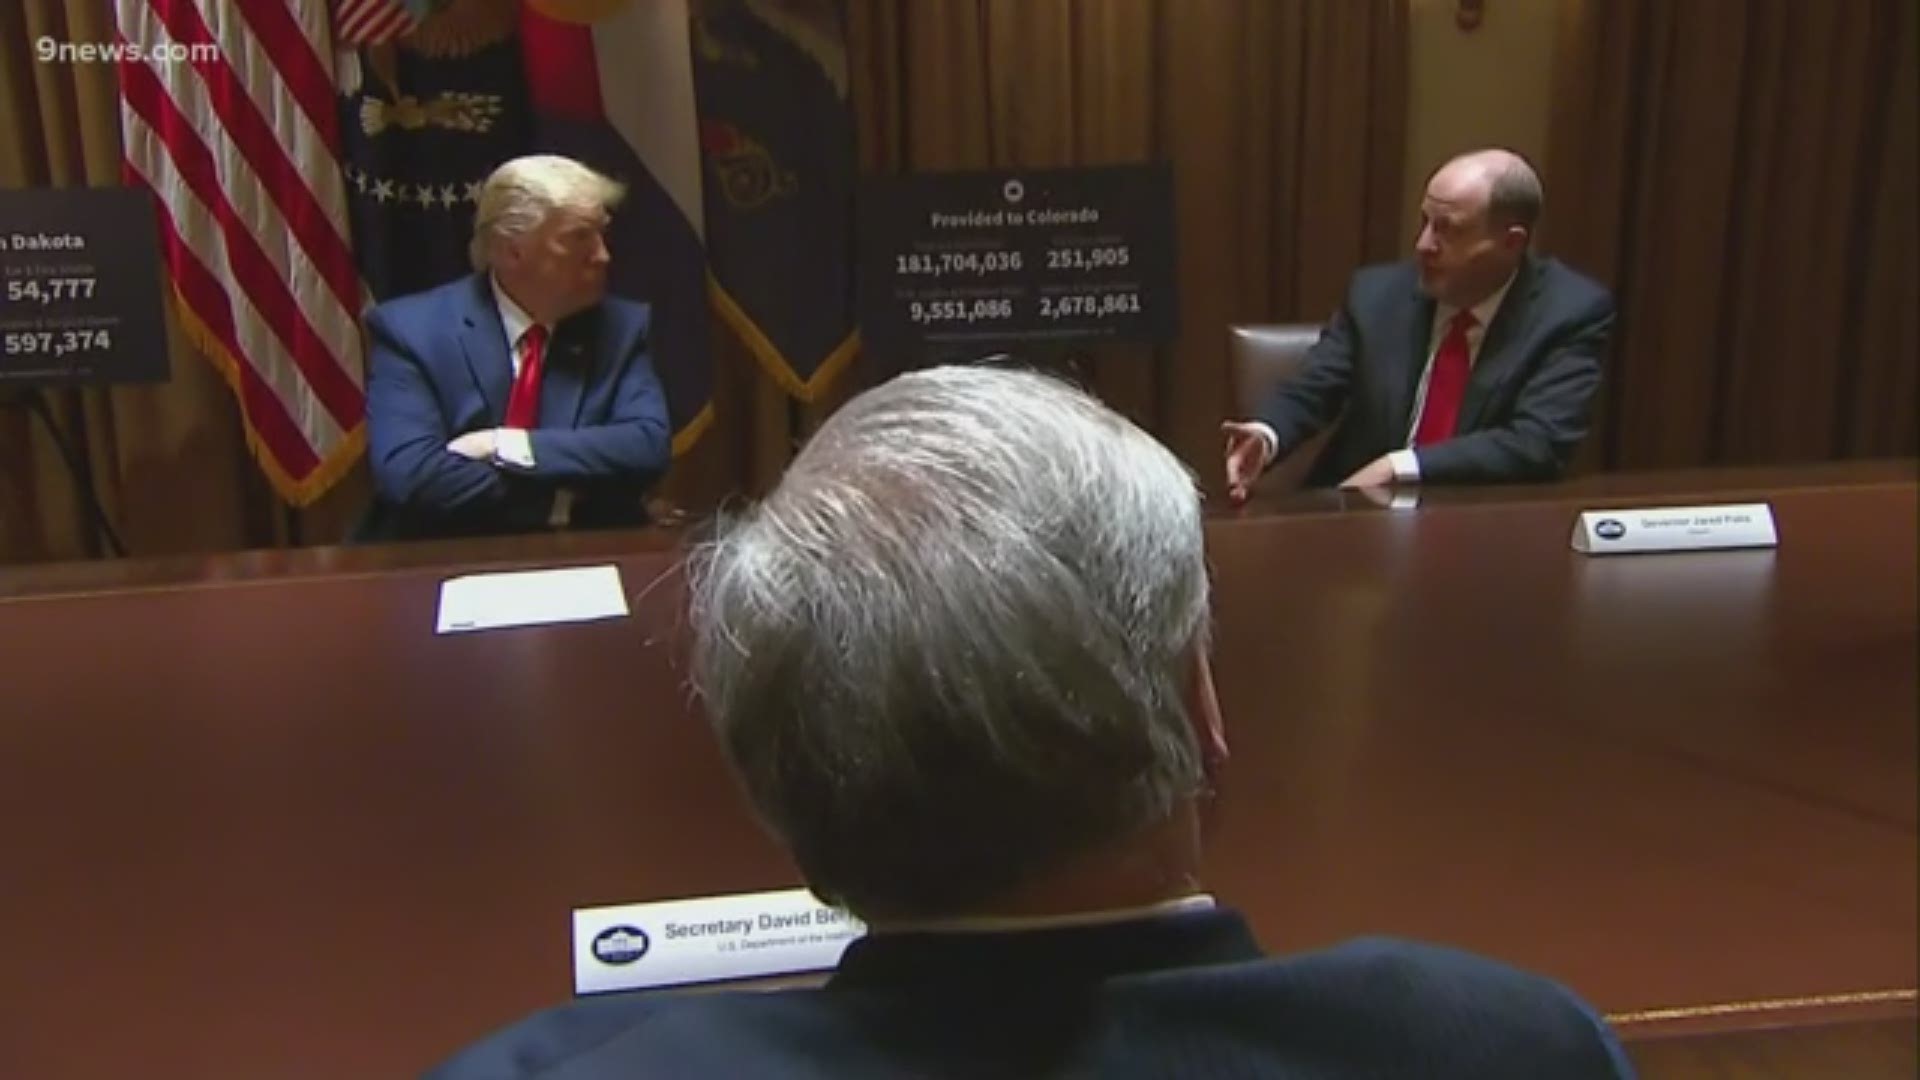 Gov. Jared Polis (D-Colorado) met with President Donald Trump in the Cabinet Room at the White House Wednesday afternoon.